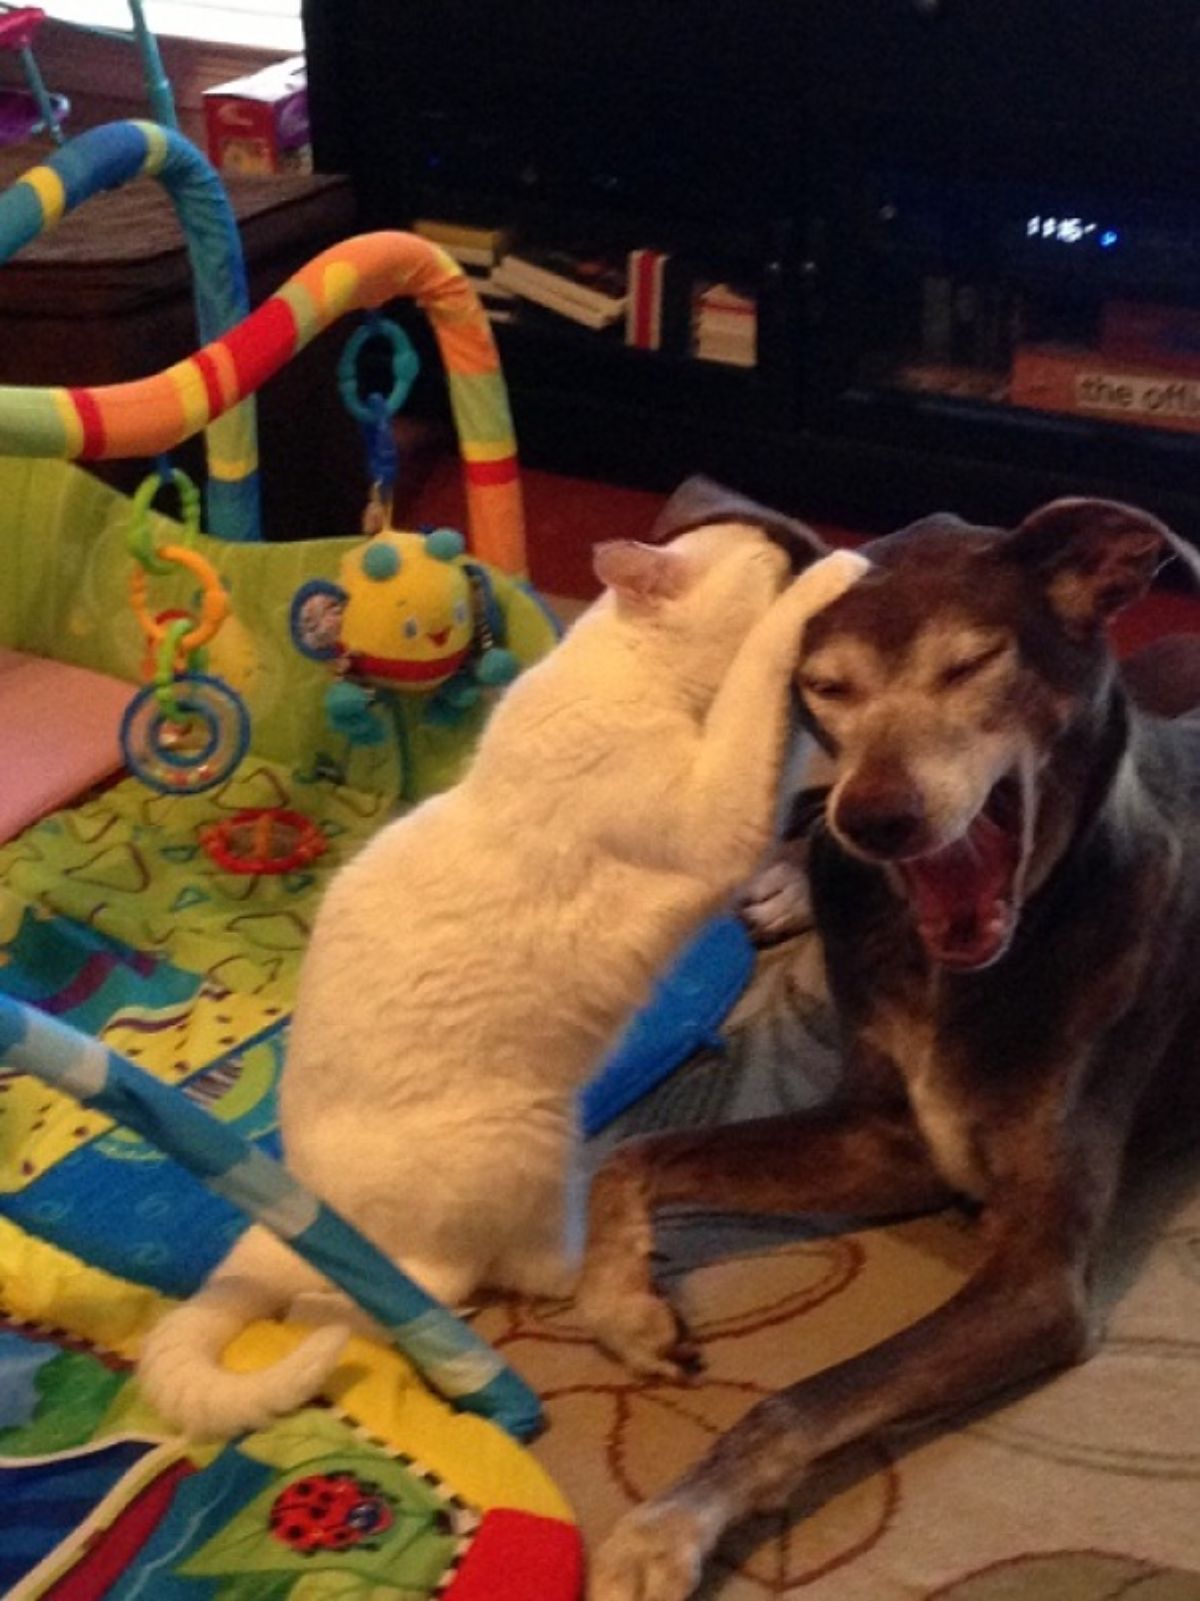 white cat attacking an old black dog that's got its mouth open